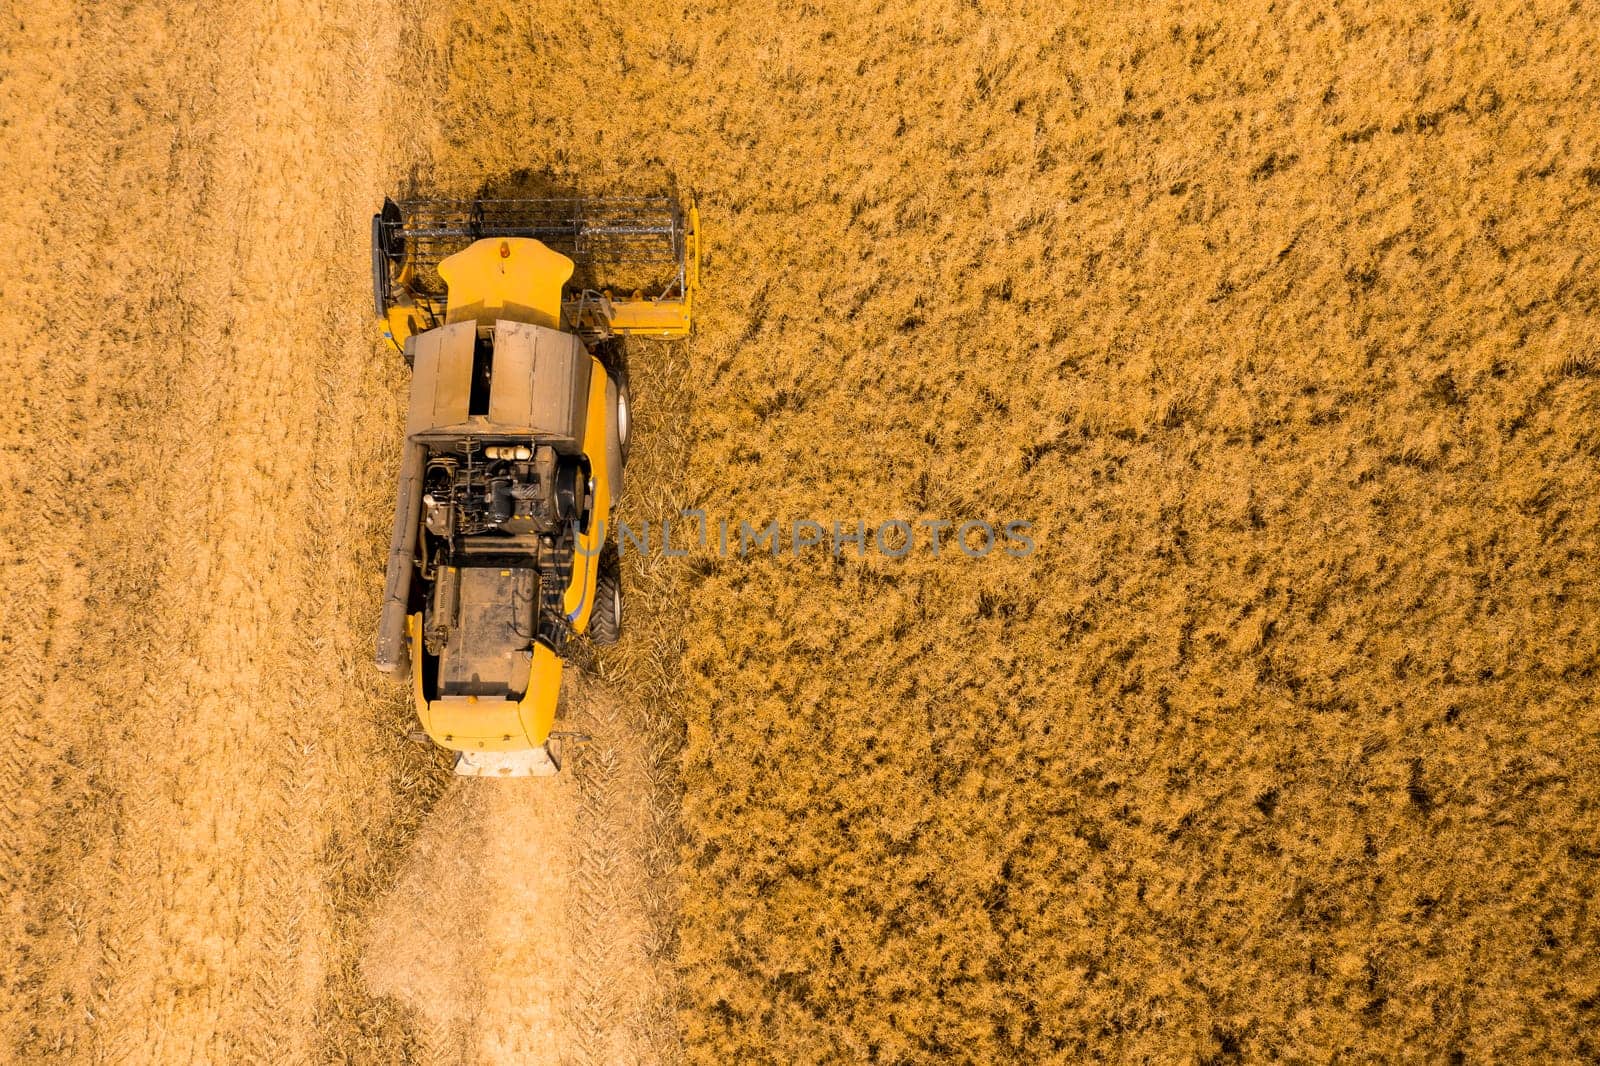 Top view of a combine harvester harvesting wheat from a field by vladimka